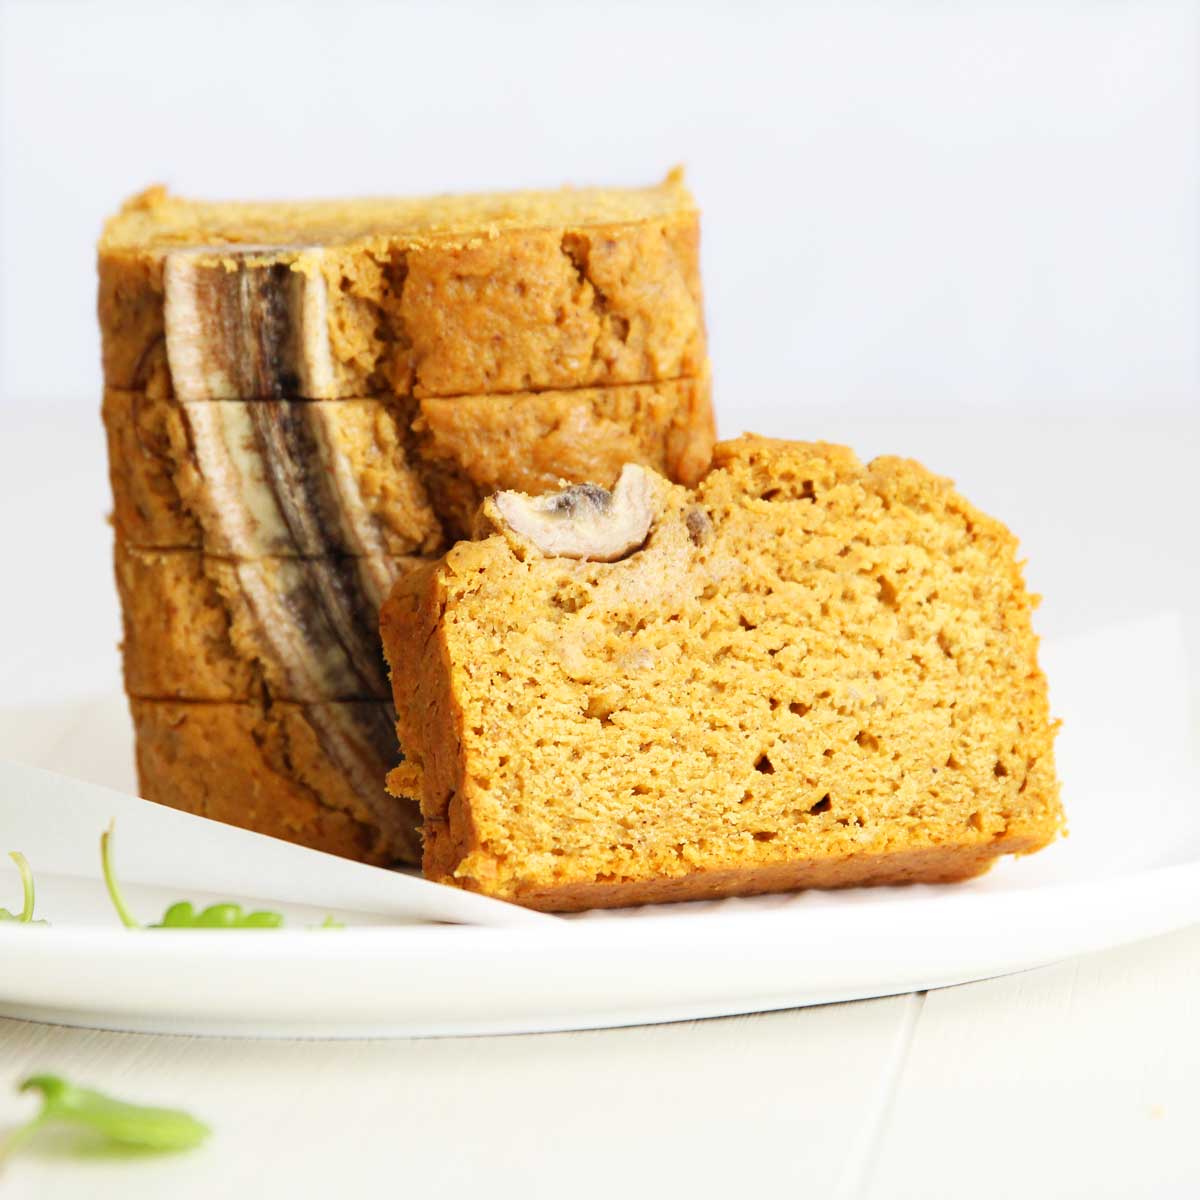 Super Moist Olive Oil Pumpkin Bread With Banana (Eggless & Dairy Free) - Pumpkin Chocolate Frosting